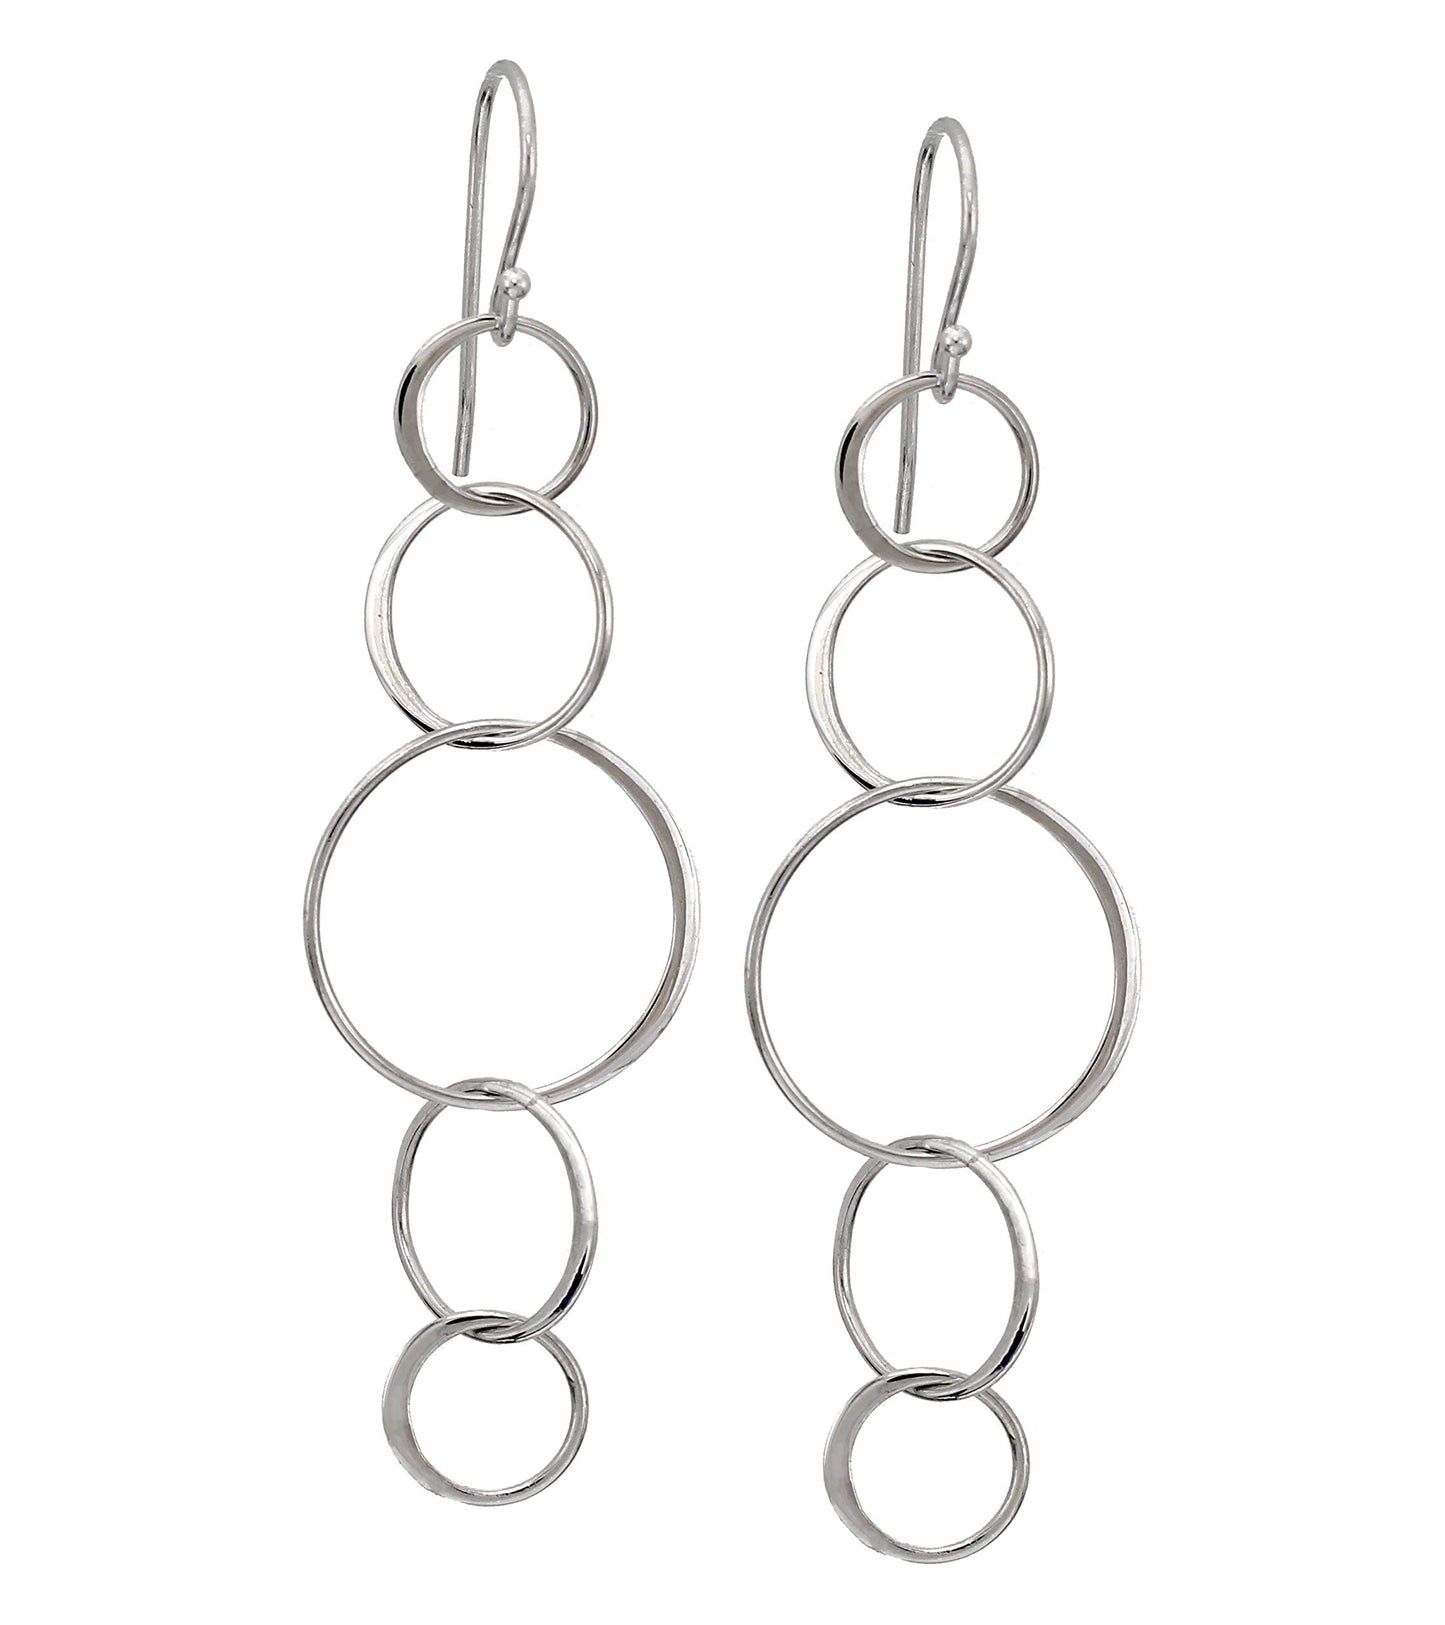 Sterling Silver 5 Connected Circle Earrings, Statement Earrings, Silver Earrings, Long Earrings, Hoop Earrings, Dangle Drop Earrings, Five Rings, Geometric, Simple, Minimalist Jewelry